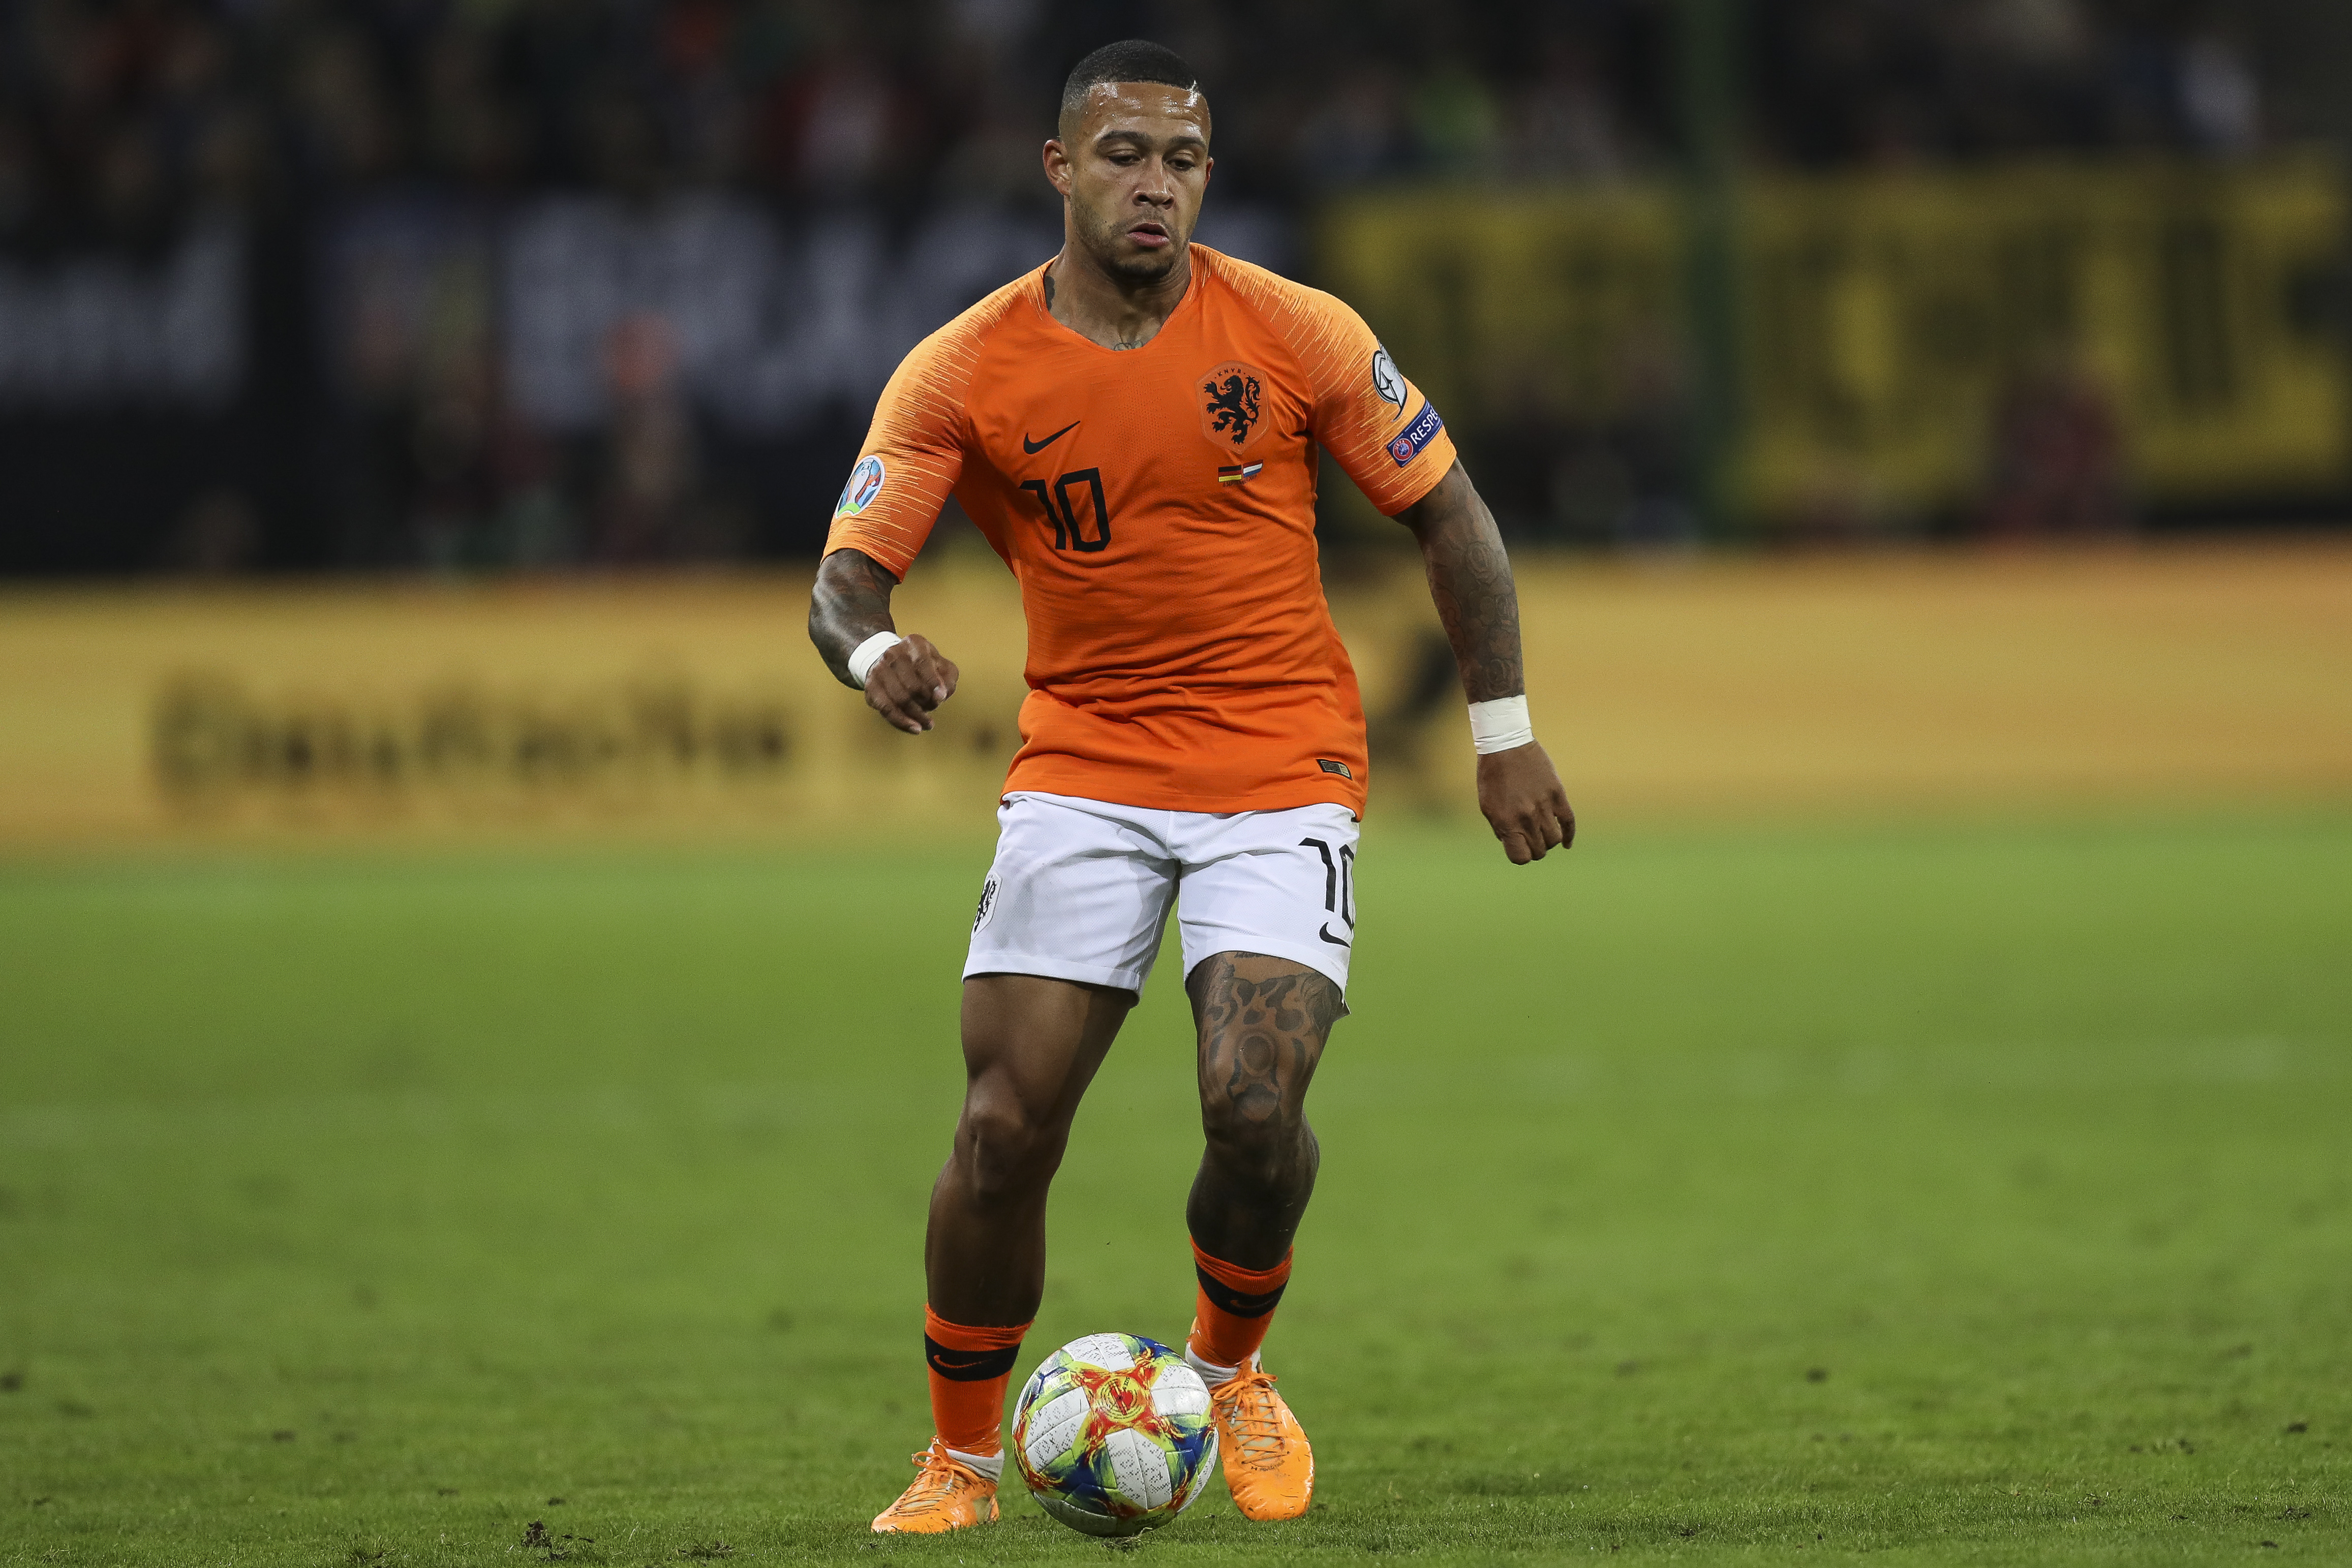 HAMBURG, GERMANY - SEPTEMBER 06: Memphis Depay of Netherlands controls the ball during the UEFA Euro 2020 qualifier match between Germany and Netherlands at Volksparkstadion on September 06, 2019 in Hamburg, Germany. (Photo by Maja Hitij/Bongarts/Getty Images)